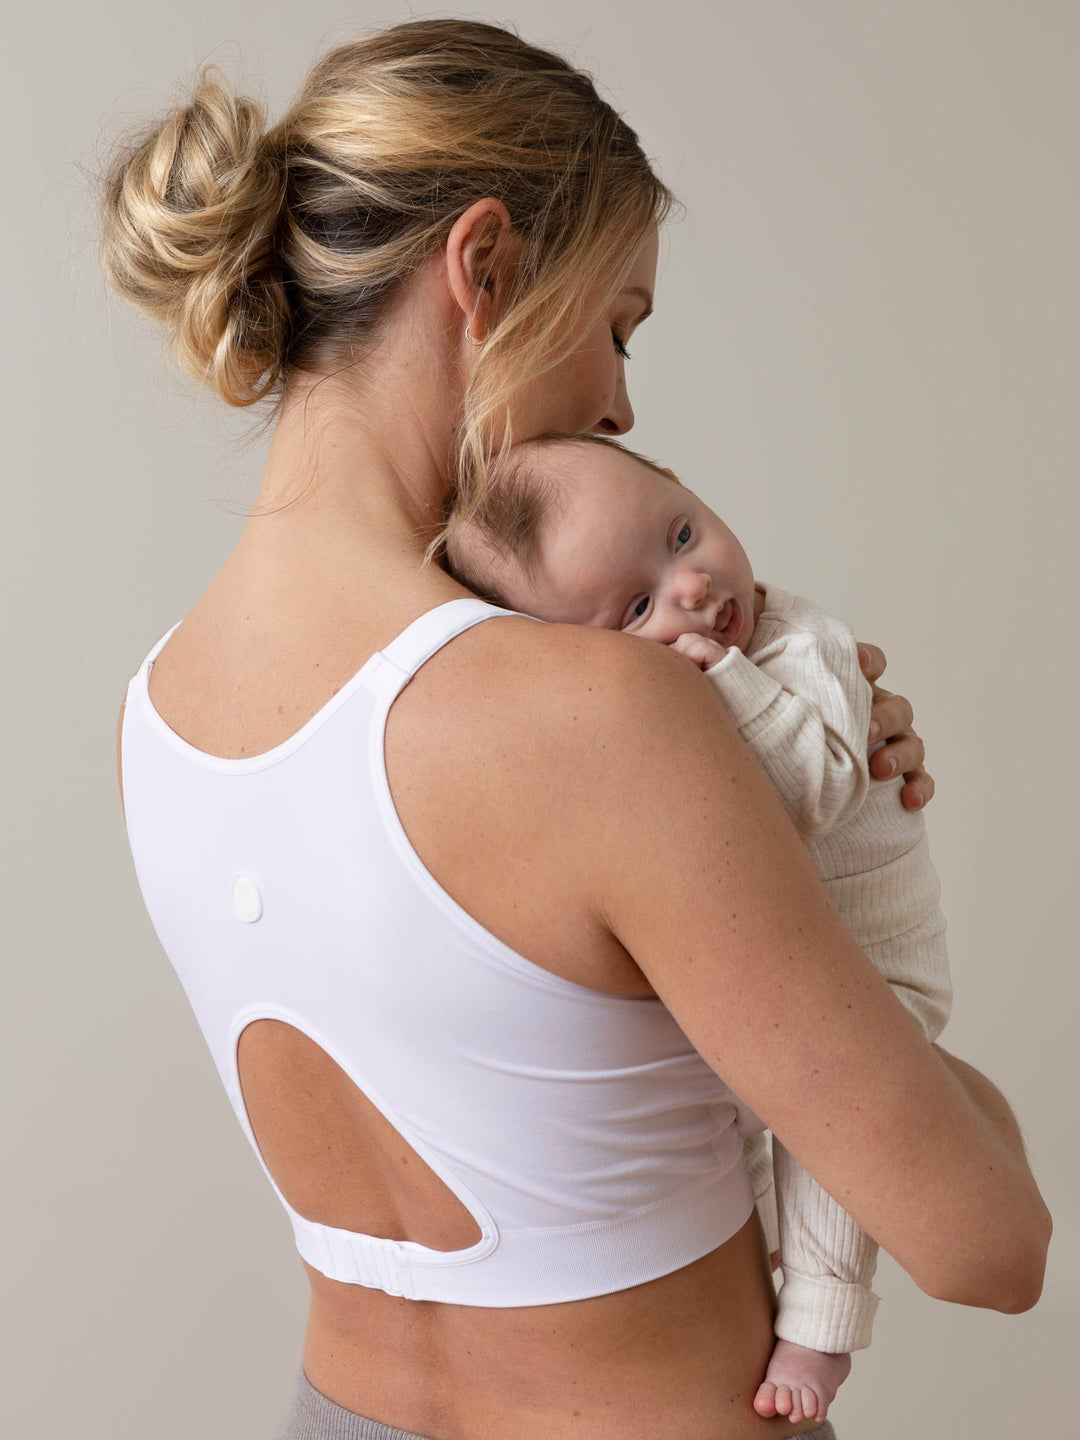 How to Use a Nursing Bra: a Step-by-Step Guide for Breastfeeding Moms